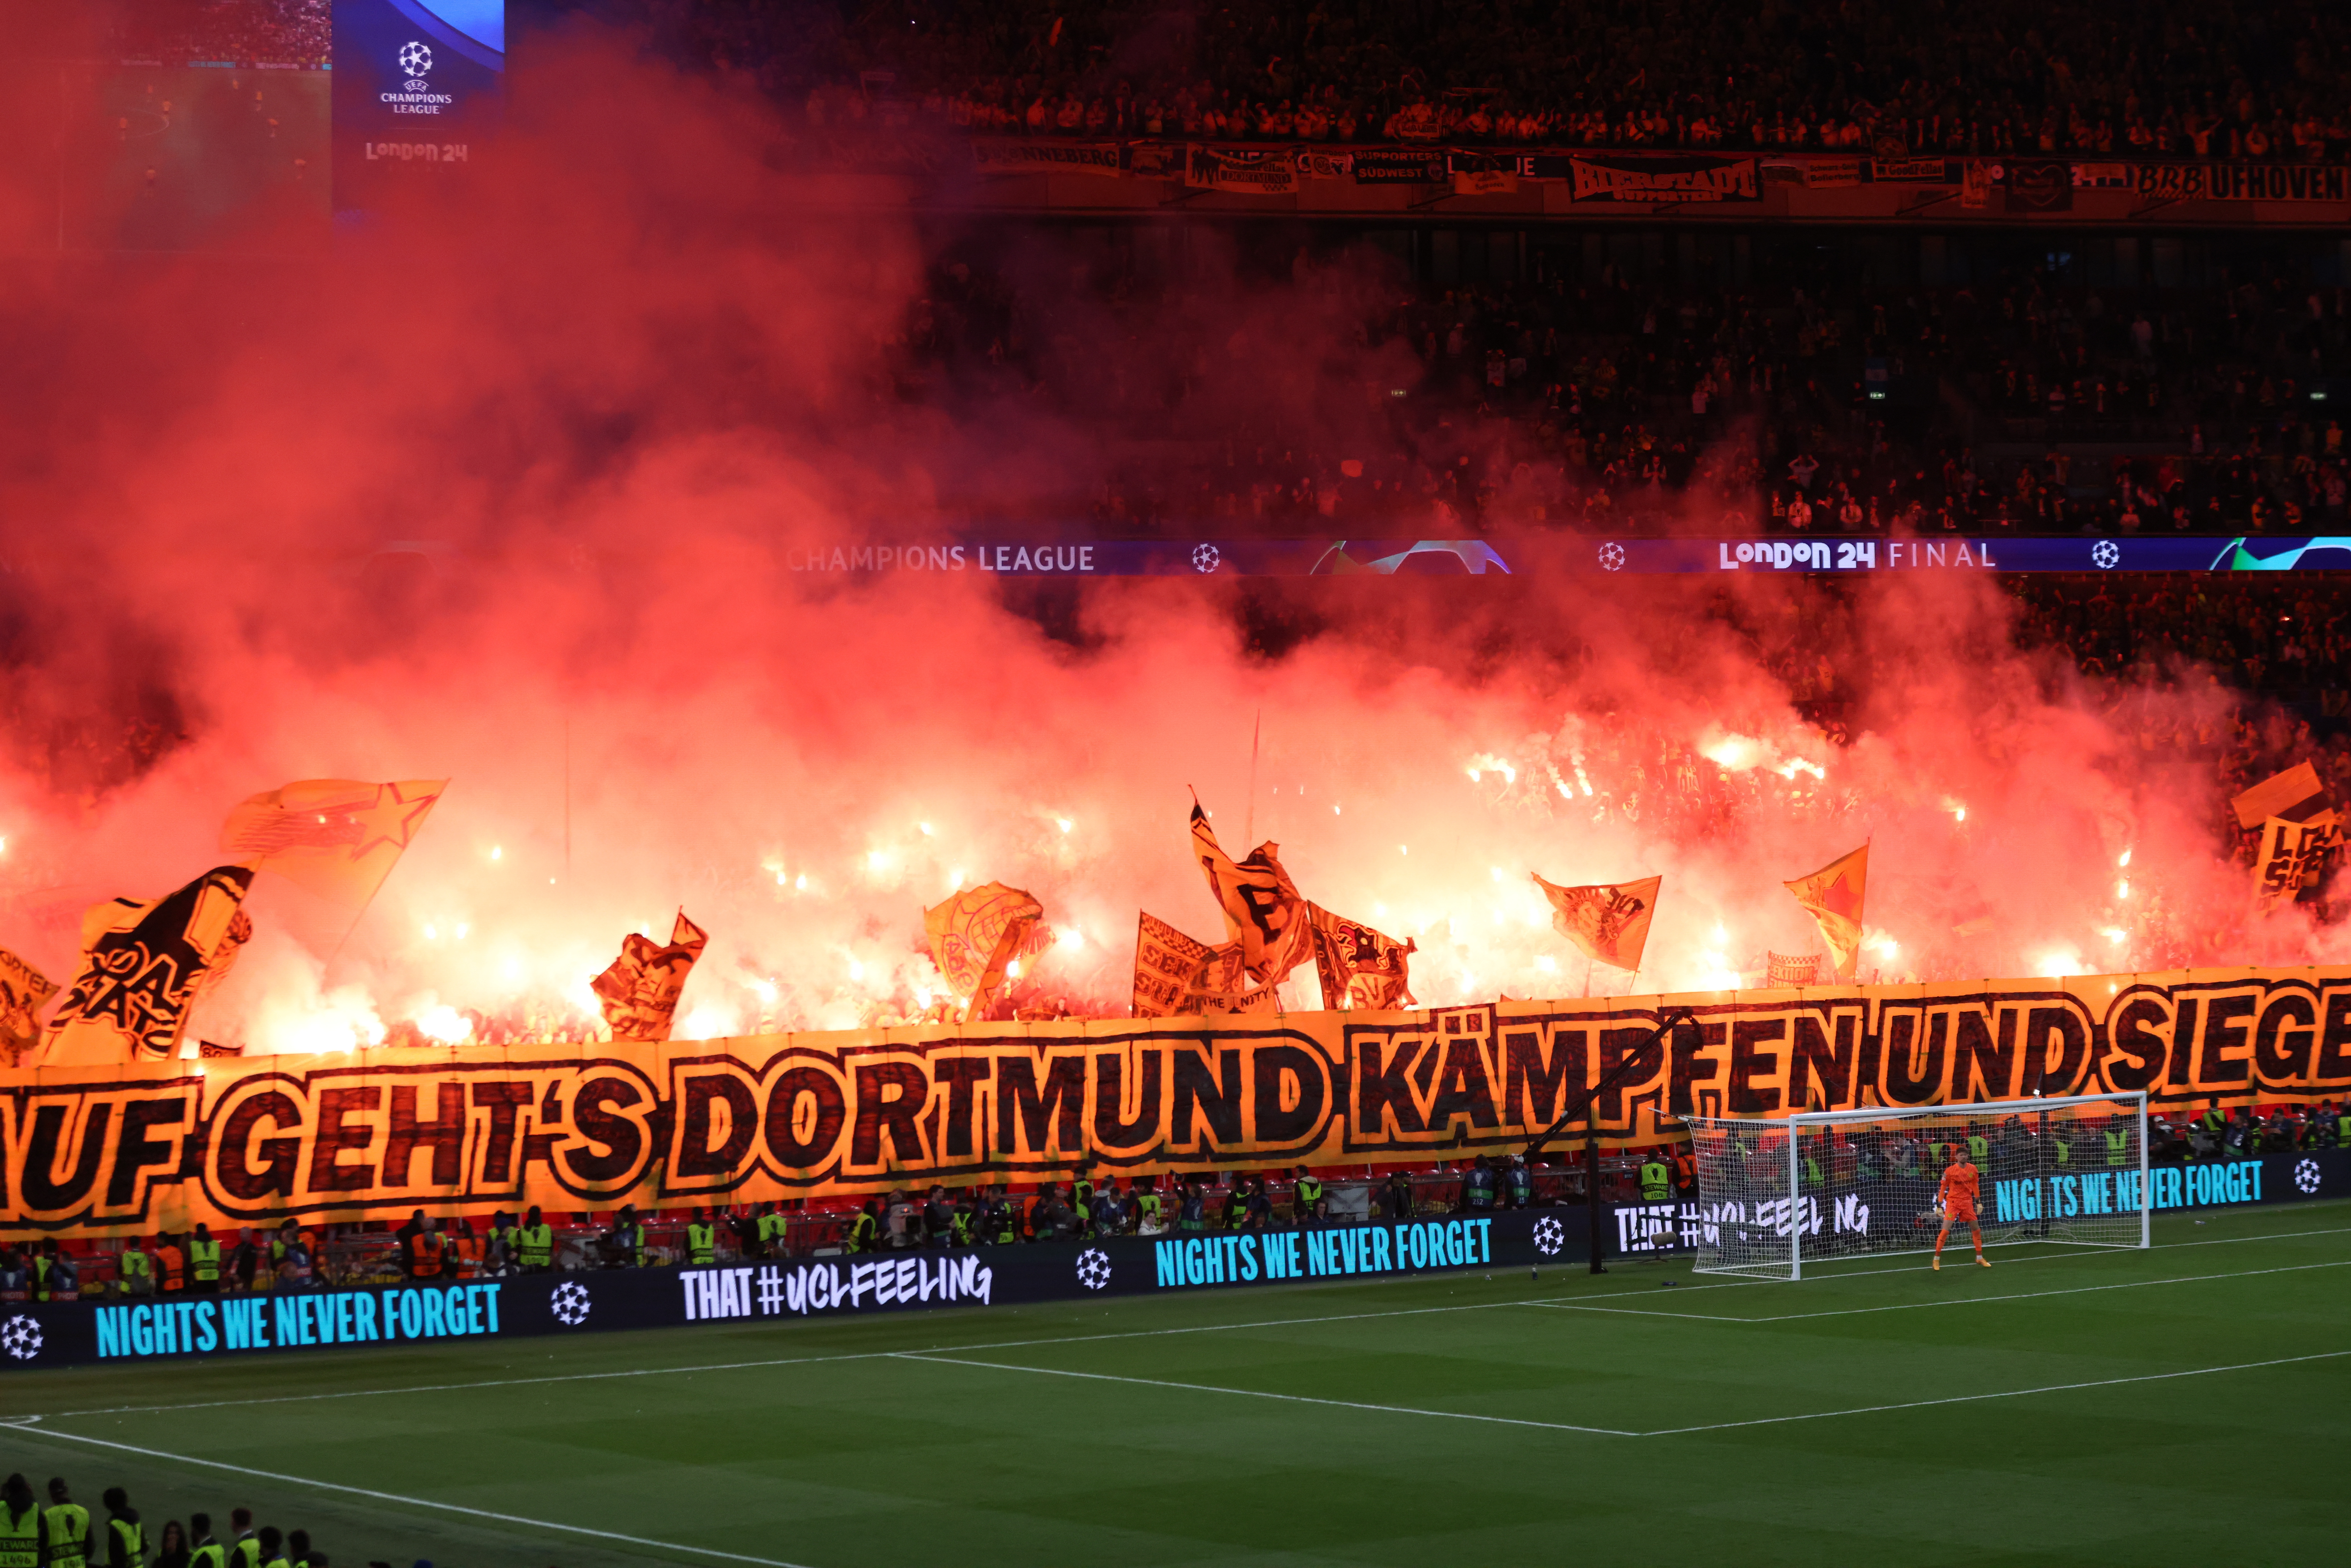 Supporters of Dortmund light flares as they perform a tifo during the UEFA Champions League final